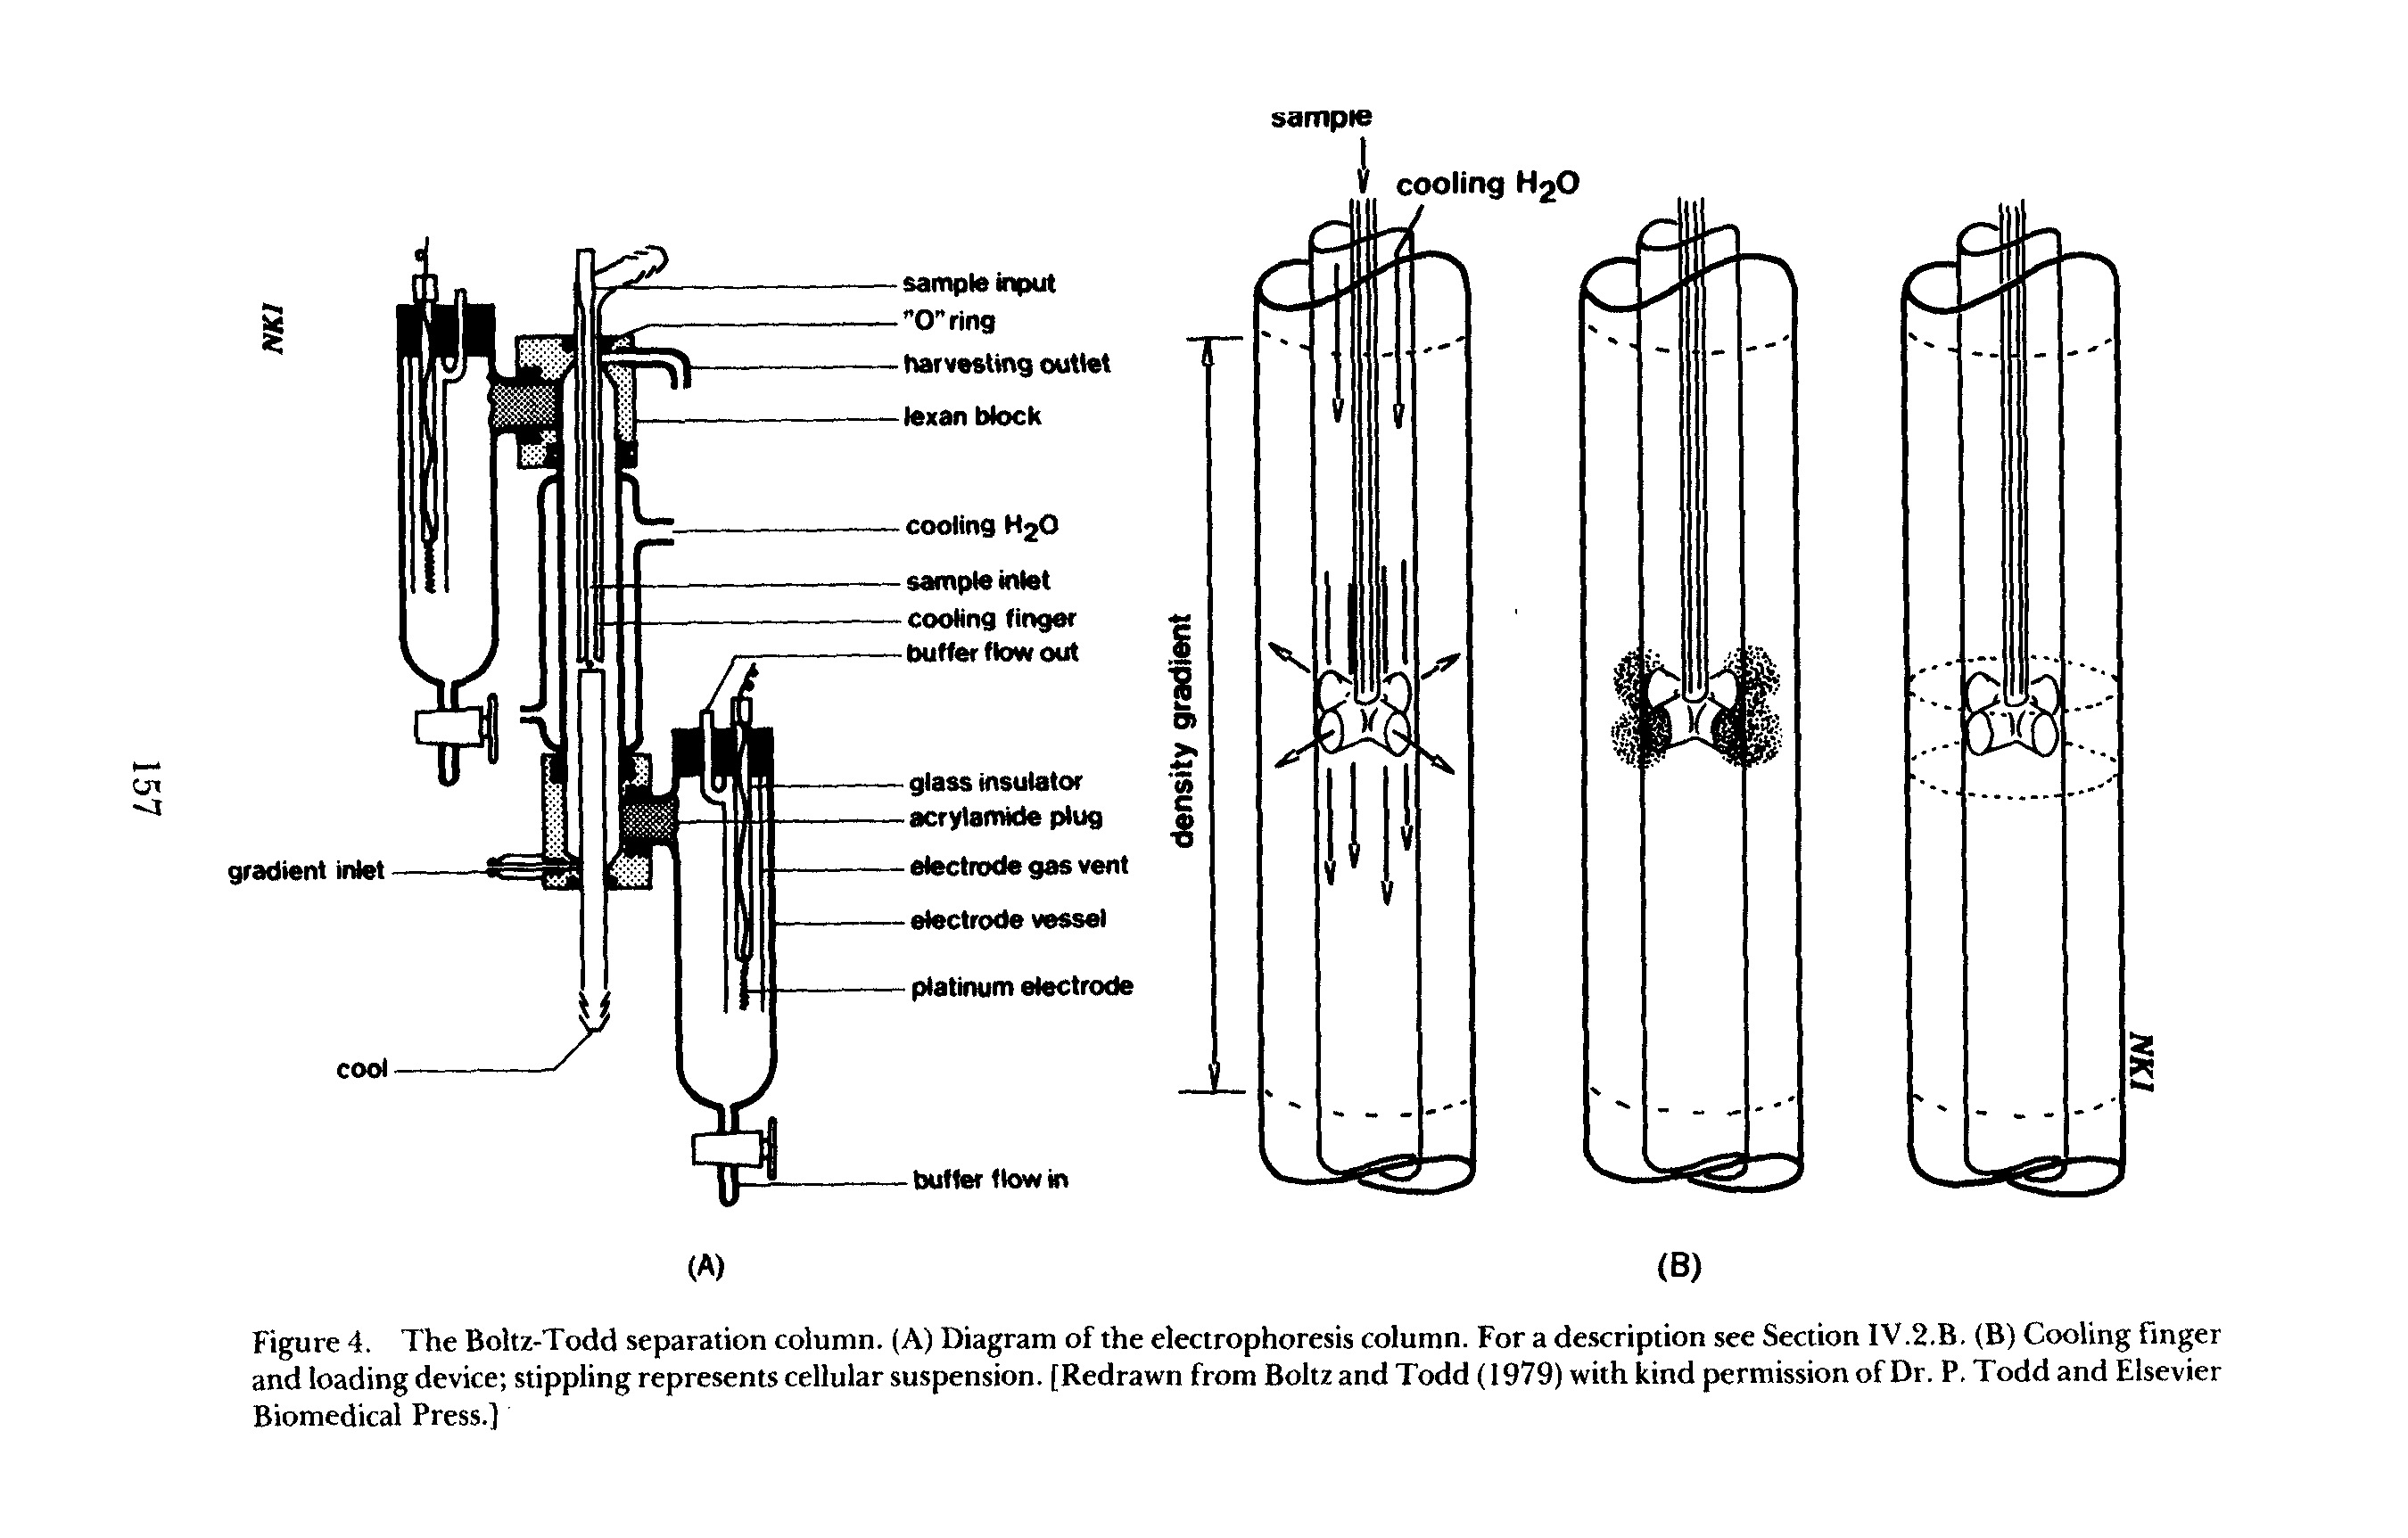 Figure 4. The Boltz-Todd separation column. (A) Diagram of the electrophoresis column. For a description see Section IV.2.B. (B) Cooling finger and loading device stippling represents cellular suspension. [Redrawn from Boltz and Todd (1979) with kind permission of Dr. P. Todd and Elsevier Biomedical Press.]...